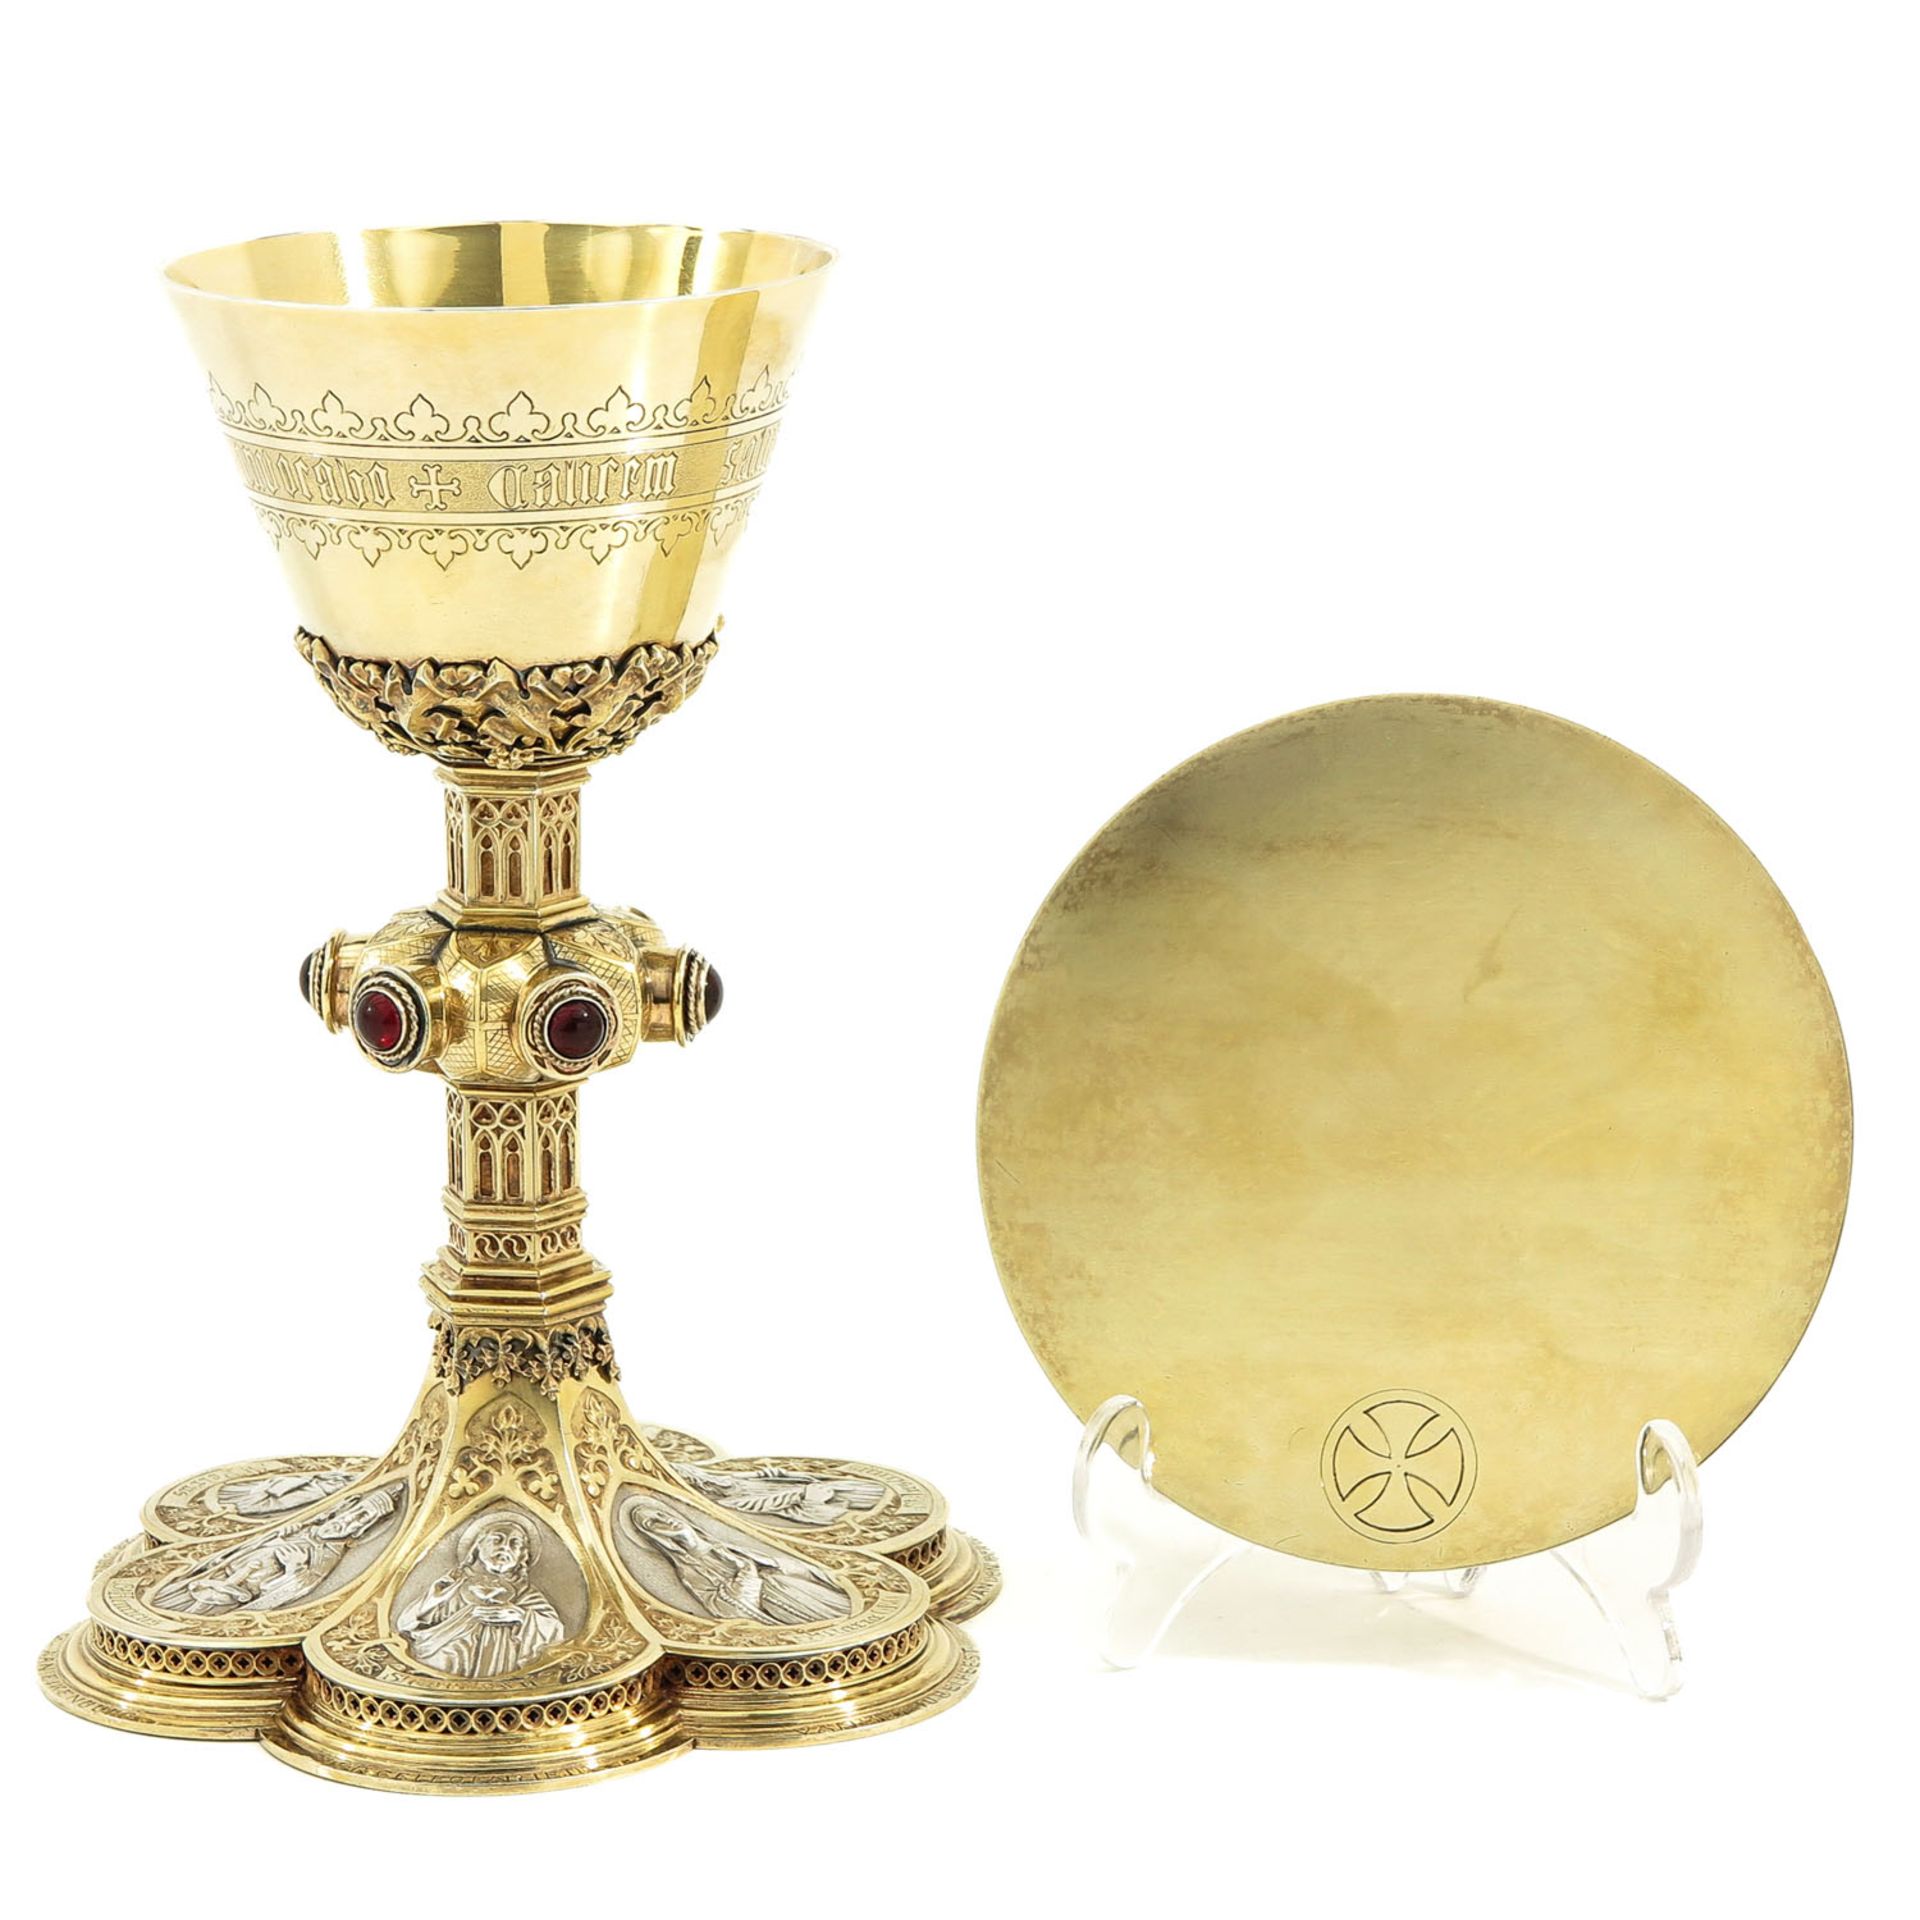 A Gilded Silver Chalice with Paten